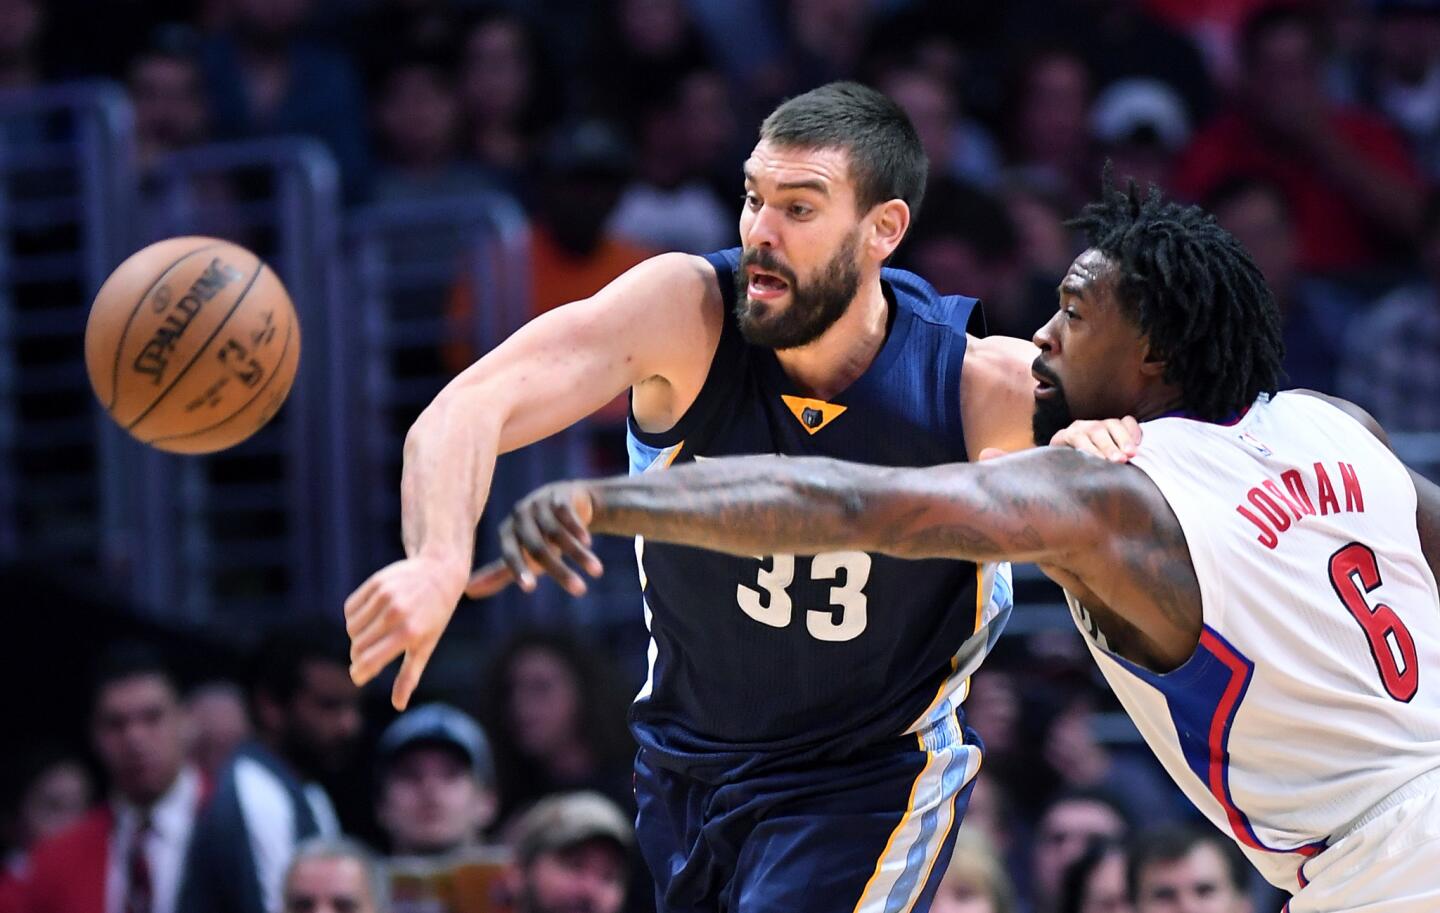 Clippers center DeAndre Jordan knocks the ball away from Grizzlies center Marc Gasol during their game Wednesday.